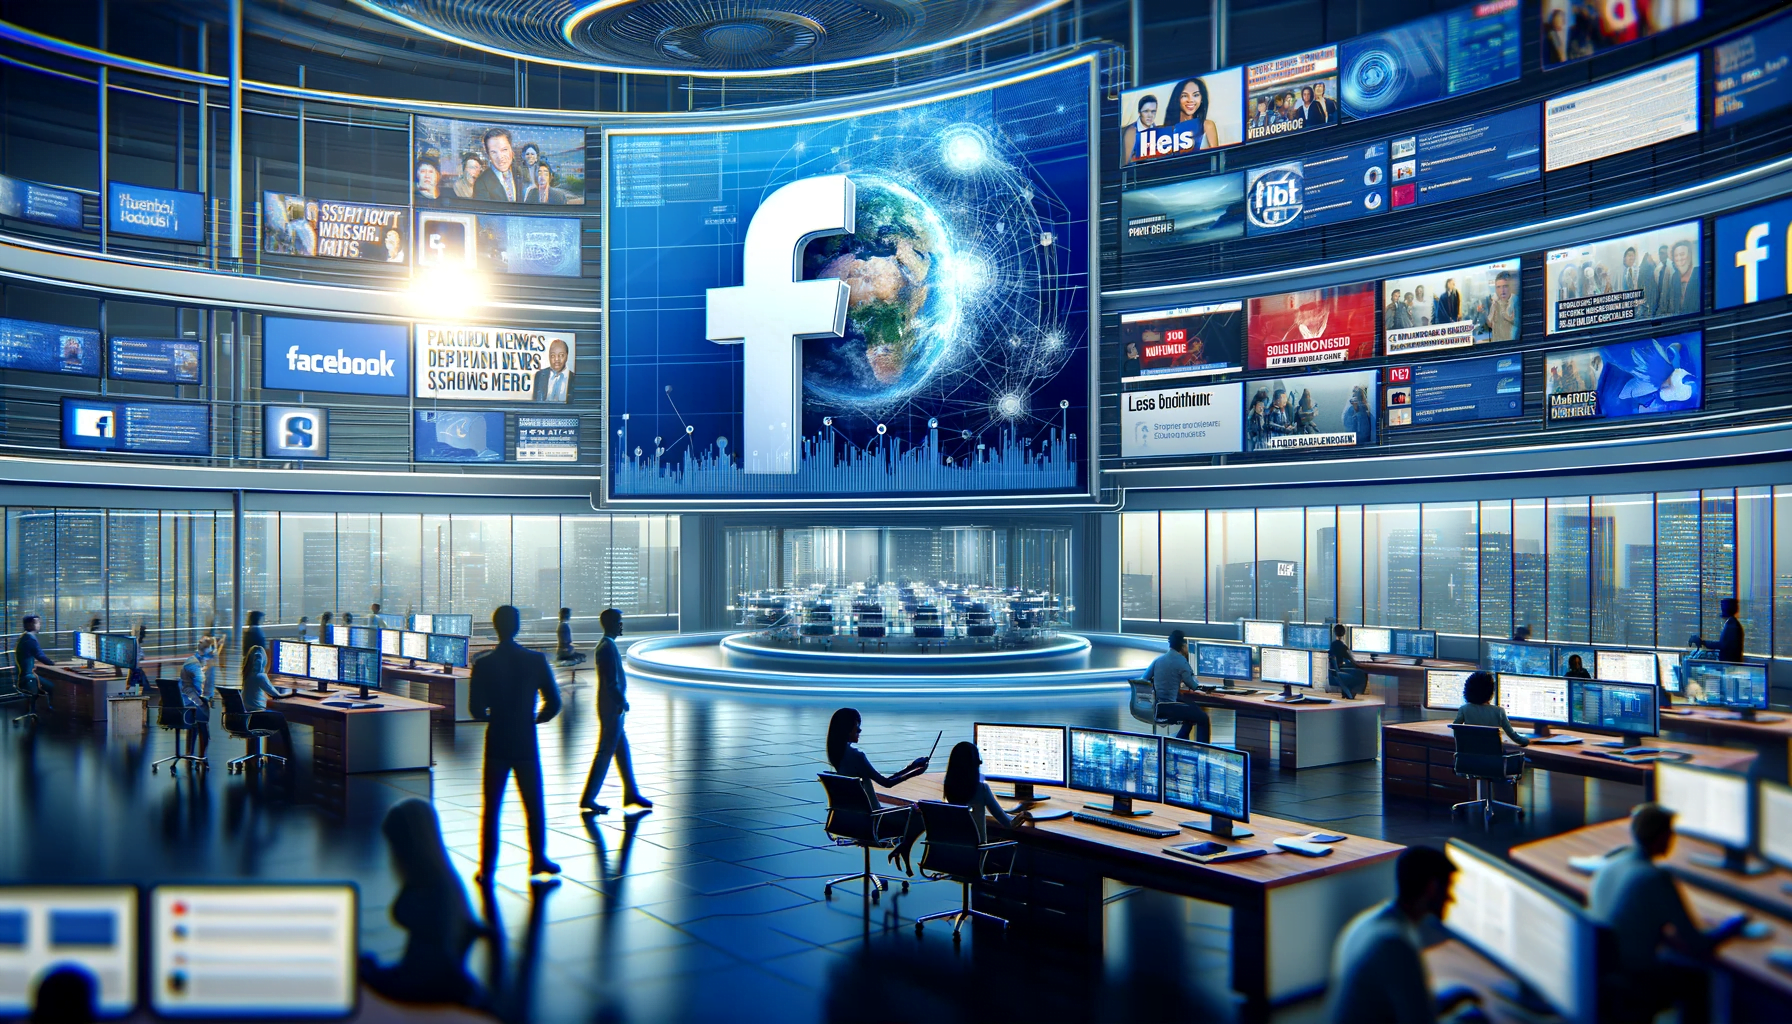 Modern newsroom highlighting Facebook's News influence in news distribution with digital screens and journalists.